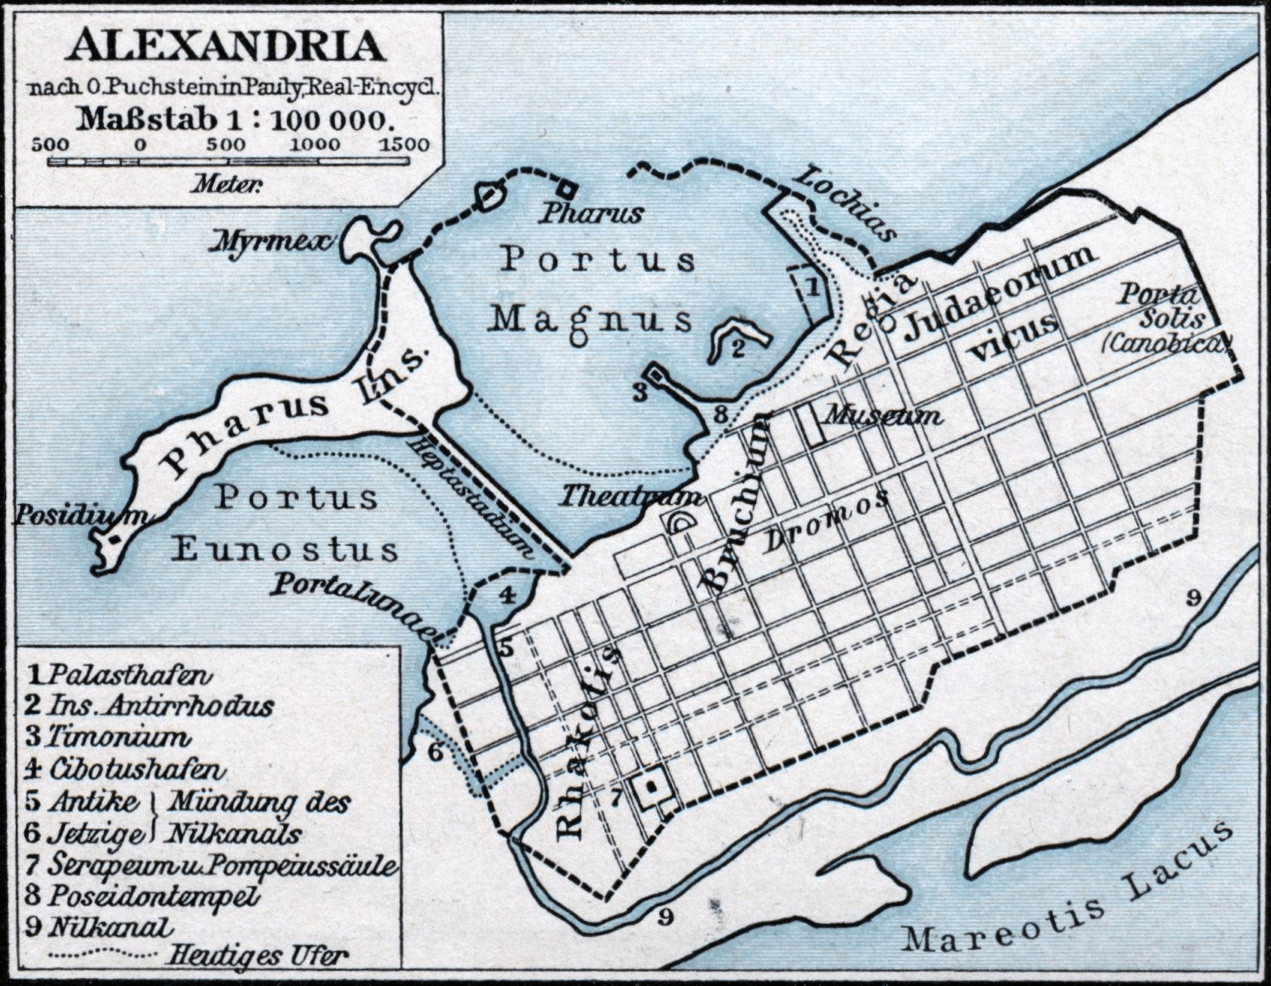 Map of ancient Alexandria. The Mouseion was located in the royal Broucheion quarter (listed on this map as "Bruchium") in the central part of the city near the Great Harbor ("Portus Magnus" on the map)